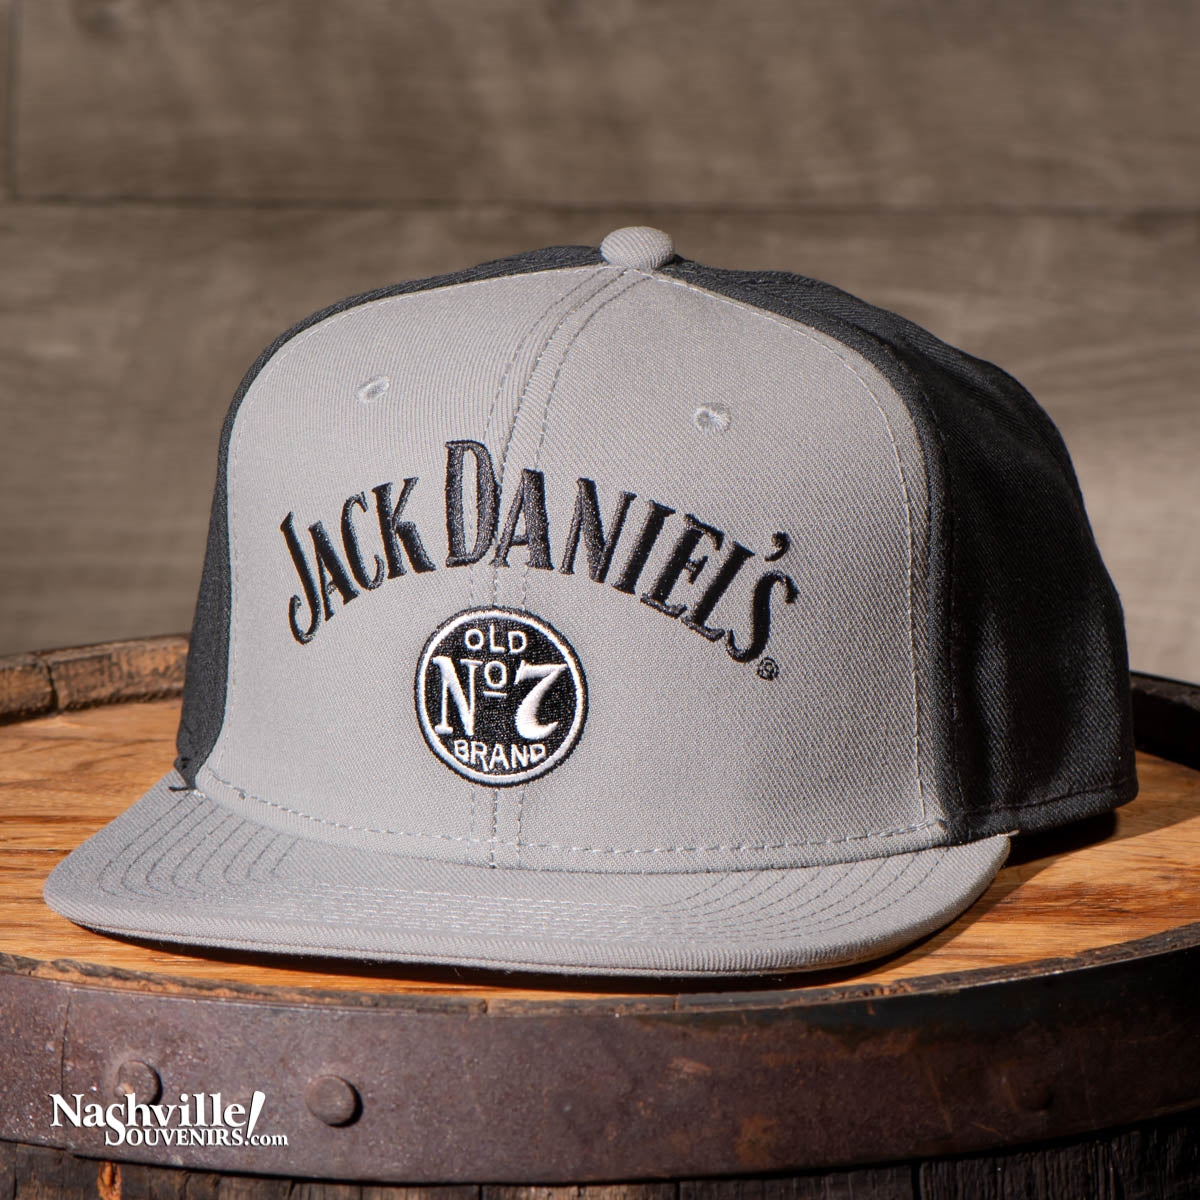 This Jack Daniel's flat brim cap has the classic Jack Daniel's swing and bug logo embroidered on the crown. The JD signature is stitched in black while the Old No.7 Brand logo is in the traditional circular shaped white on black design.